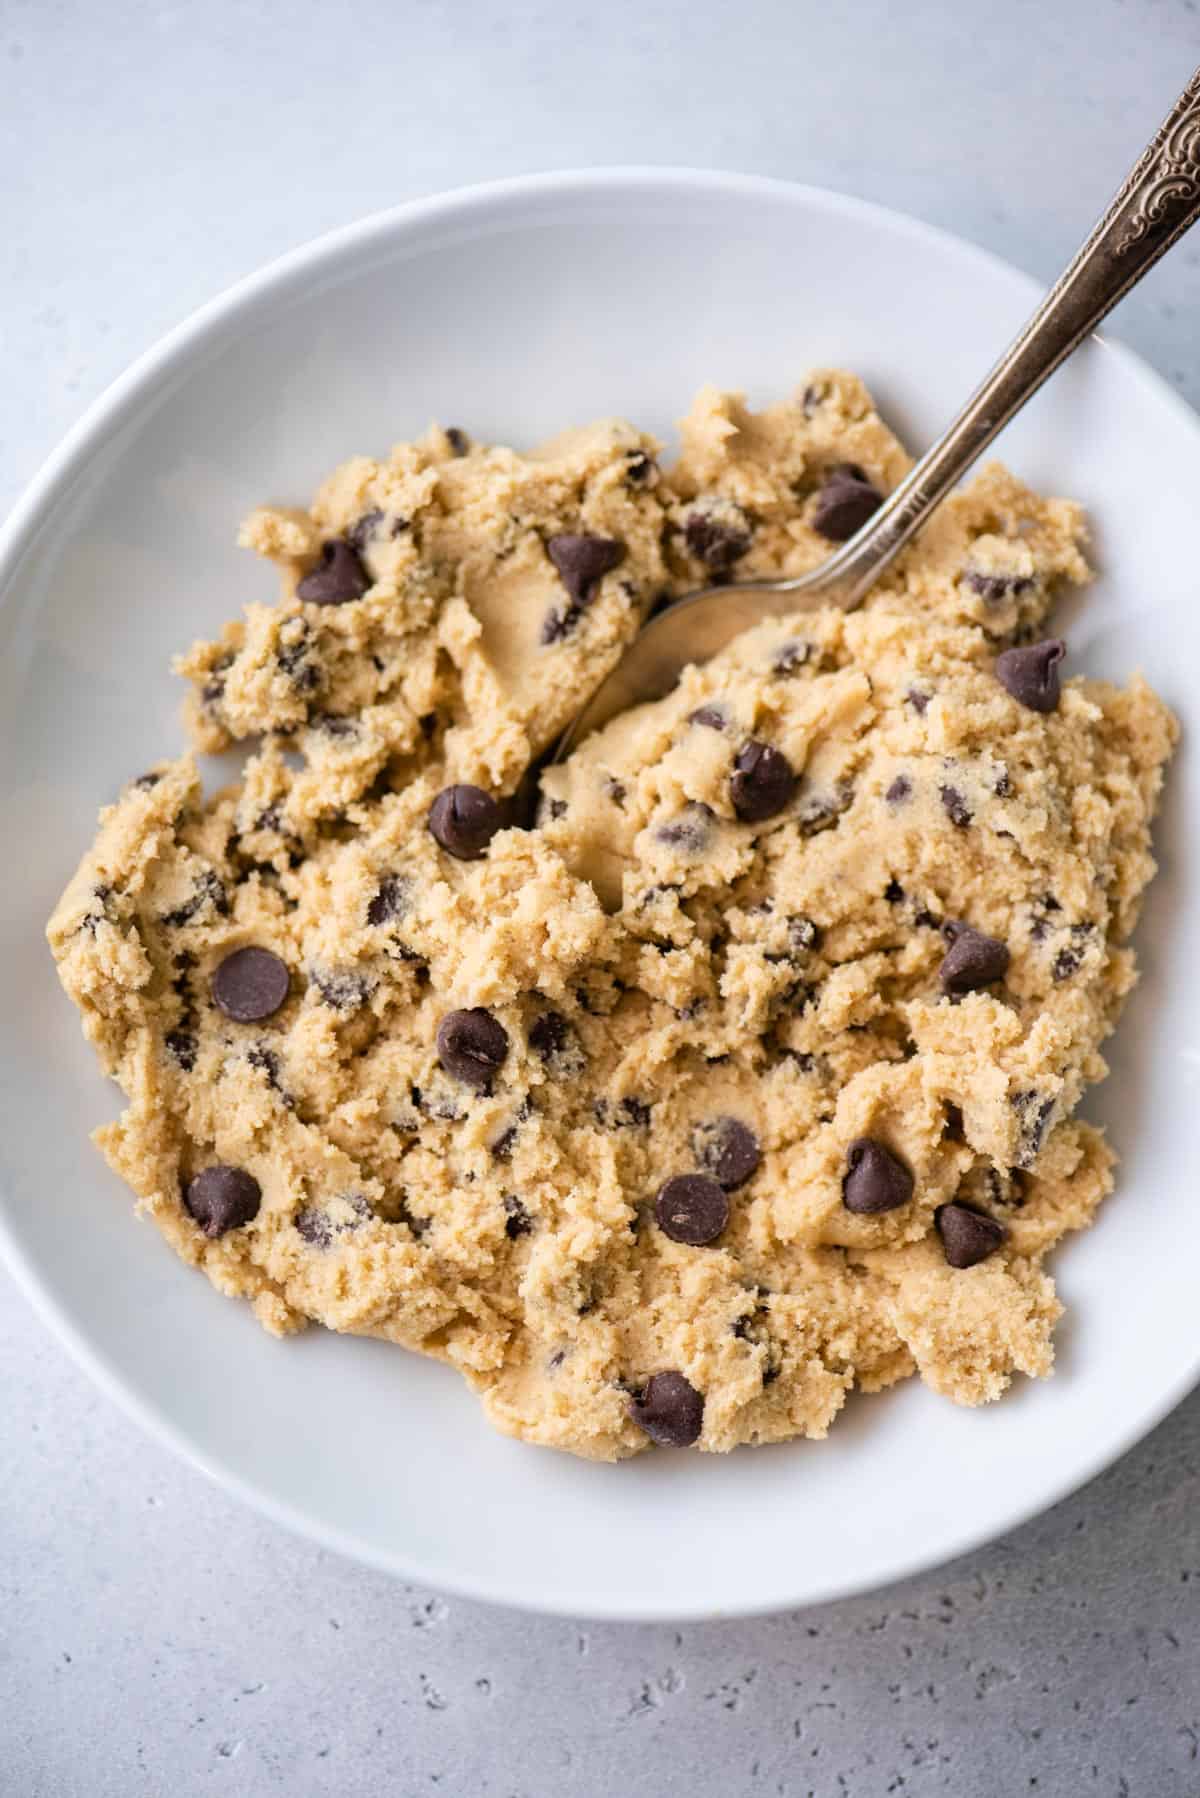 Overhead view of chocolate chip cookie dough in bowl with spoon